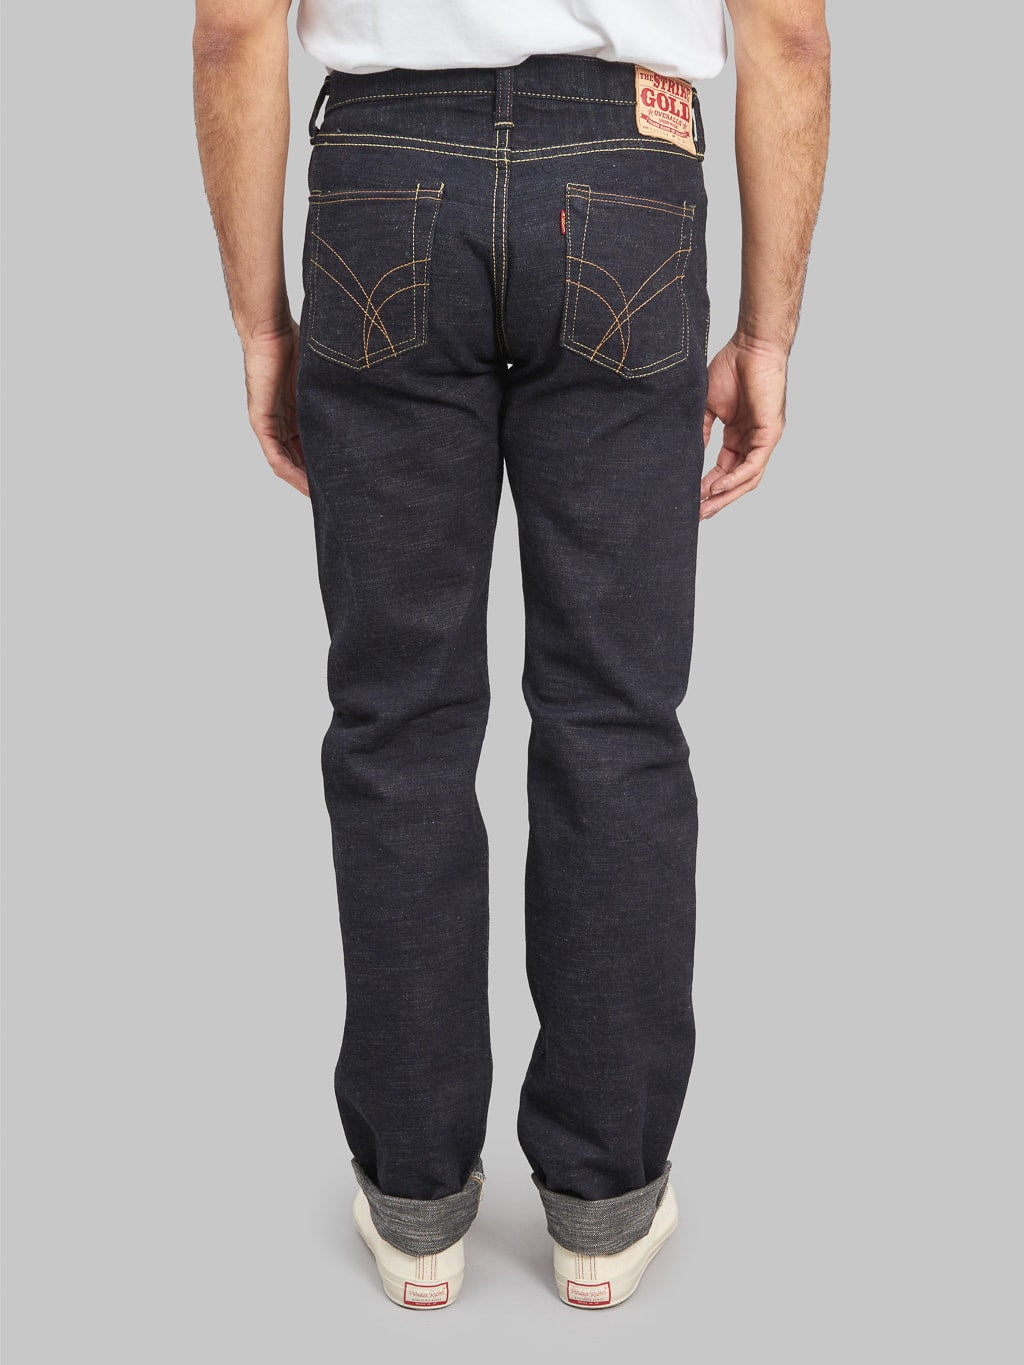 The Strike Gold 5104 Slub Grey Weft Straight Tapered Jeans back fit